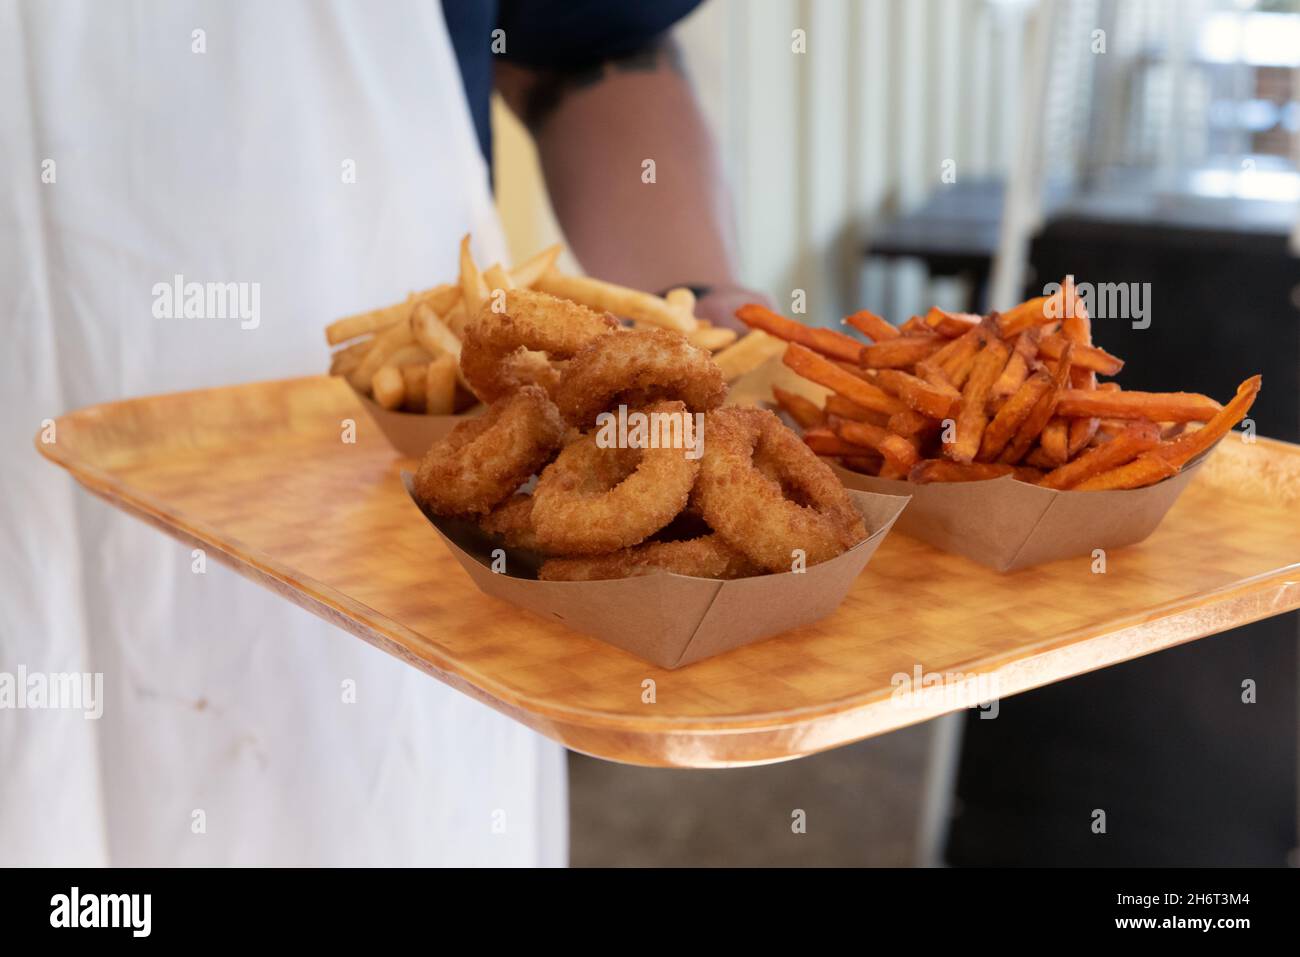 Waiter bringing the restaurant onion rings and french fries on a tray wearing an apron. Stock Photo